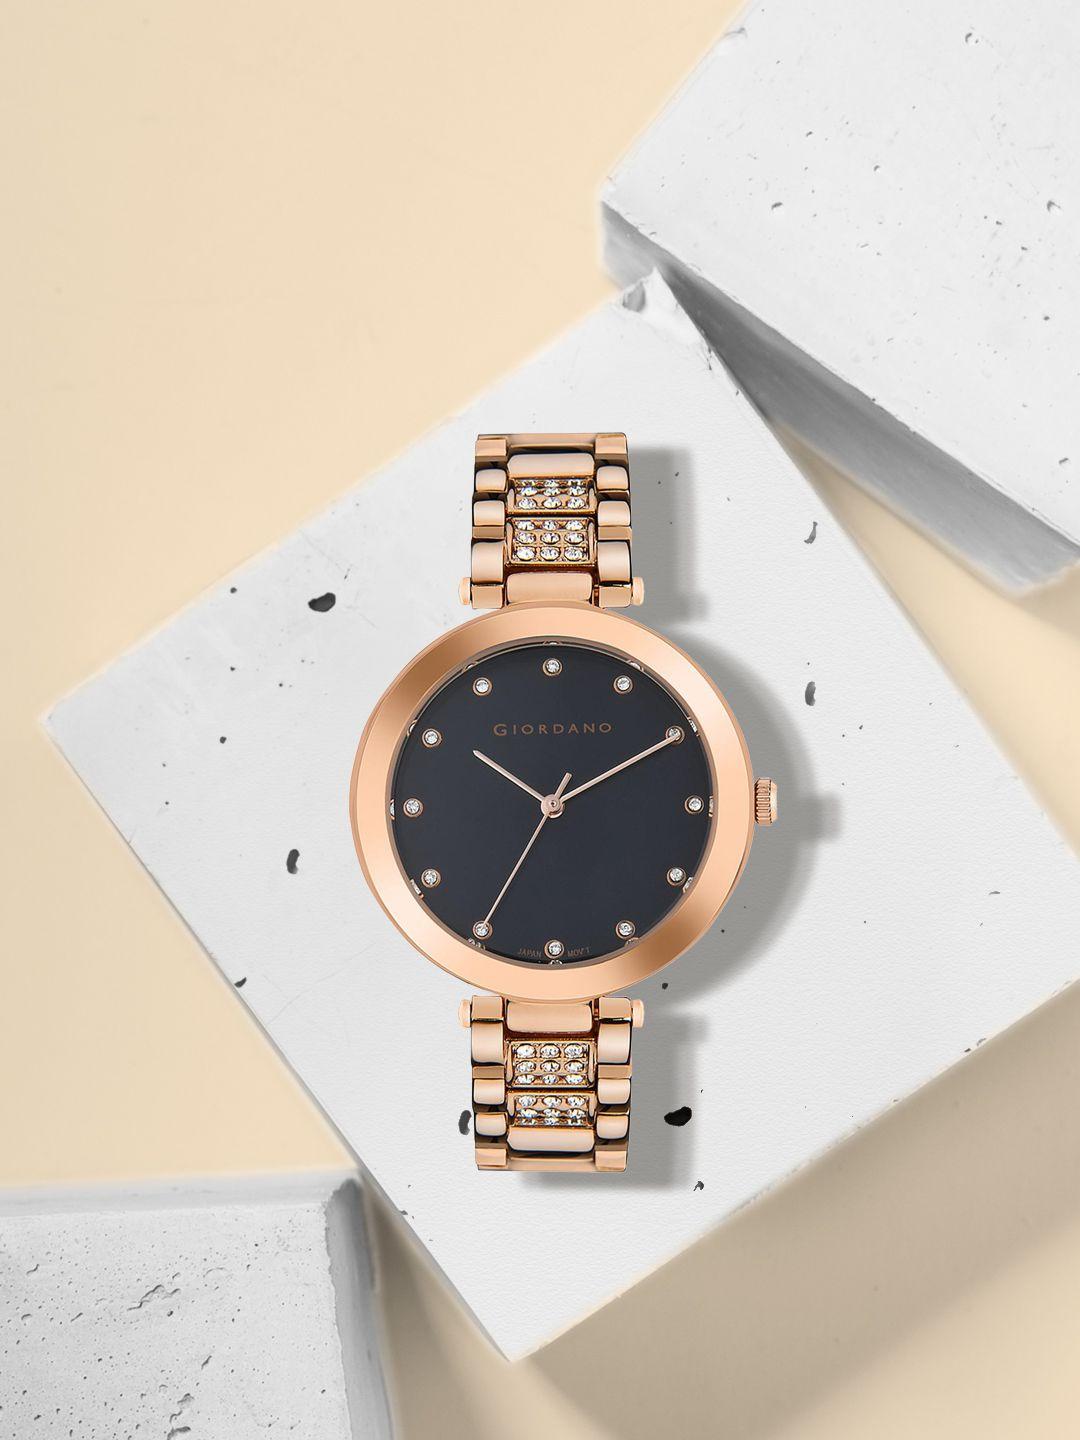 giordano-women-black-embellished-dial-&-rose-gold-toned-stainless-steel-bracelet-style-straps-analogue-watch